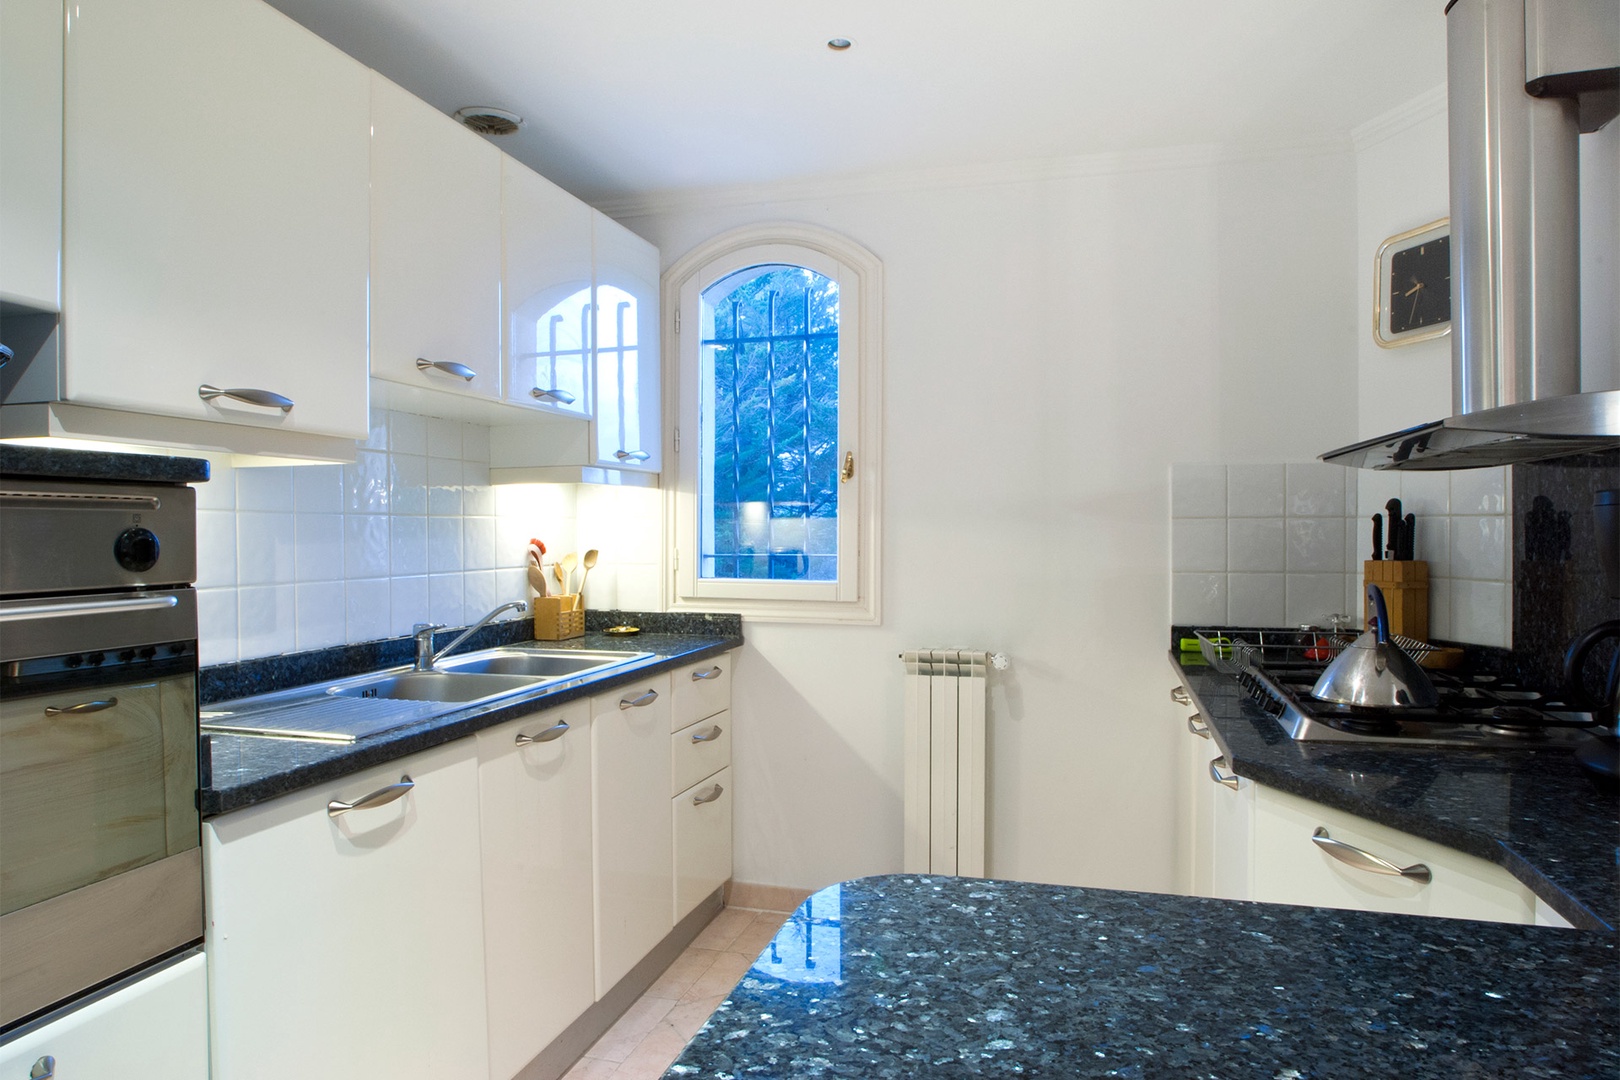 Main kitchen, fully equipped with everything you need